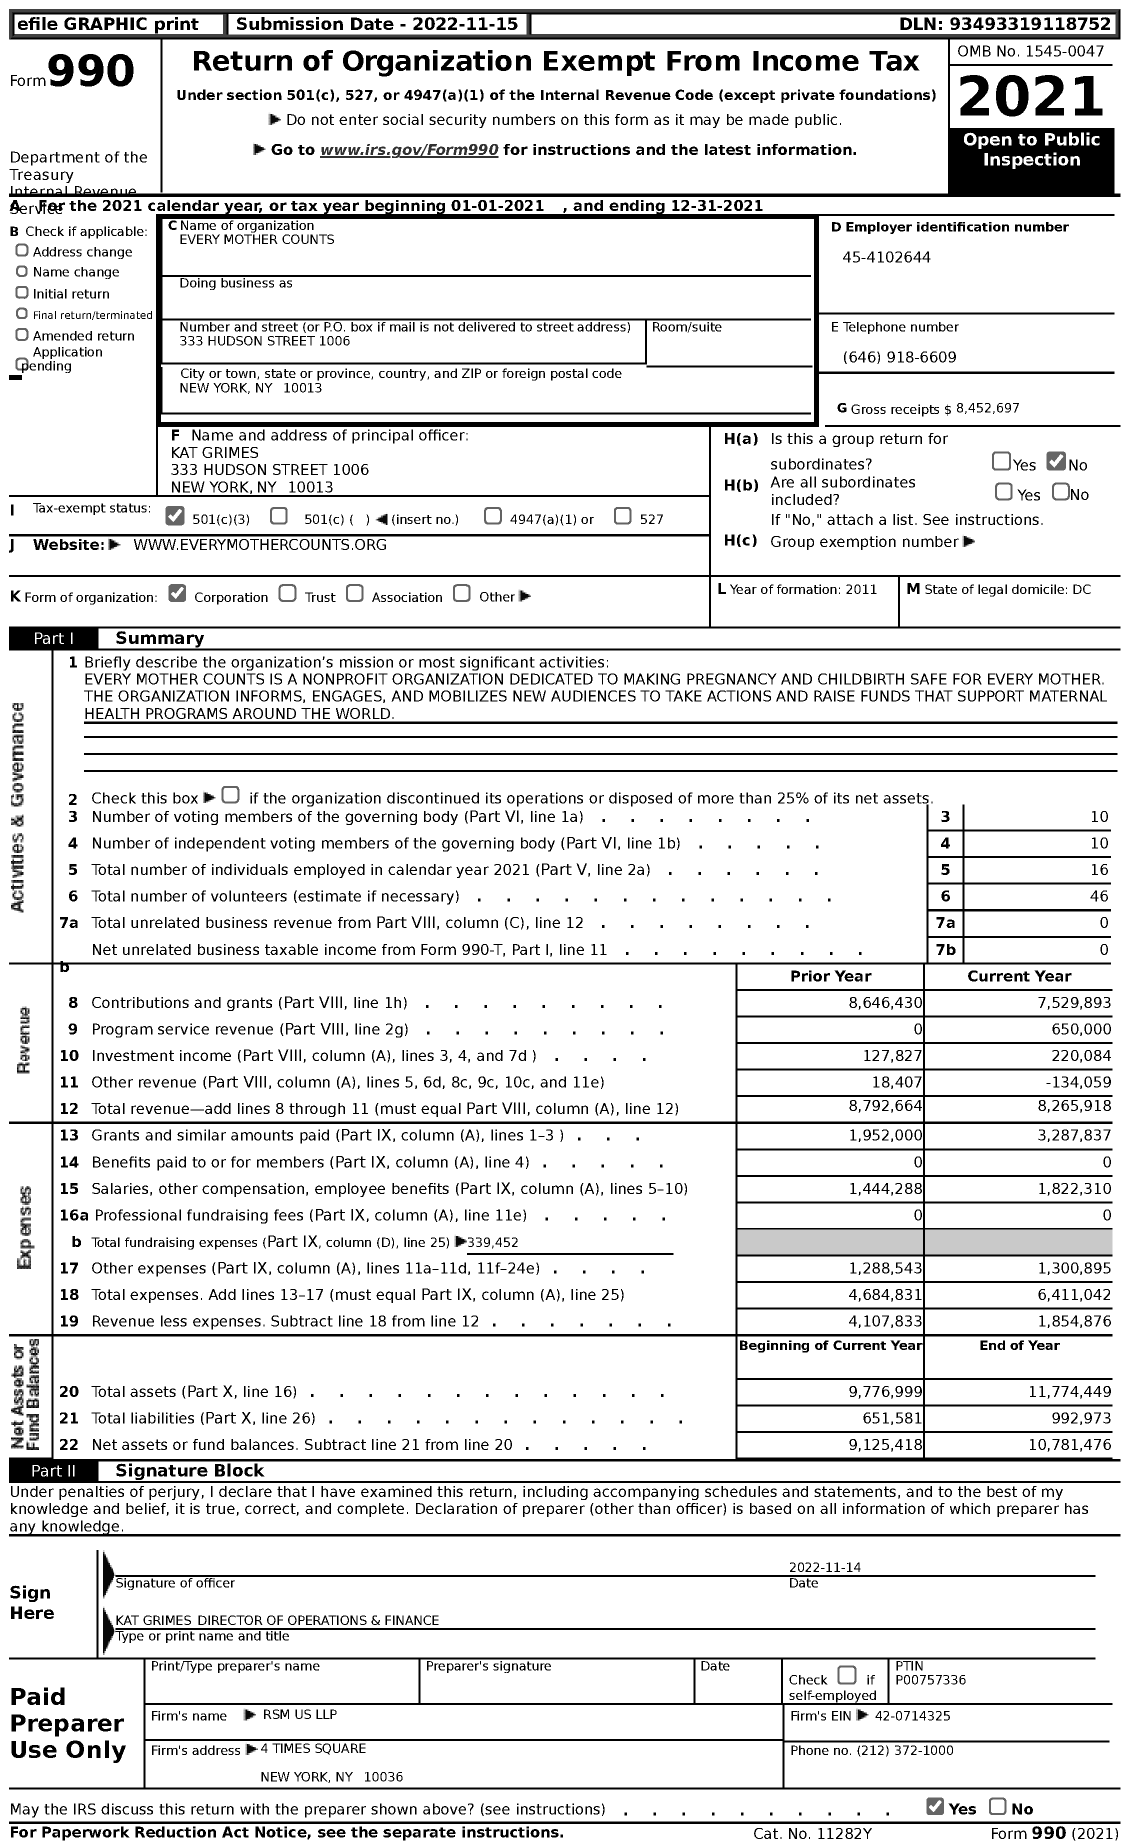 Image of first page of 2021 Form 990 for Every Mother Counts (EMC)